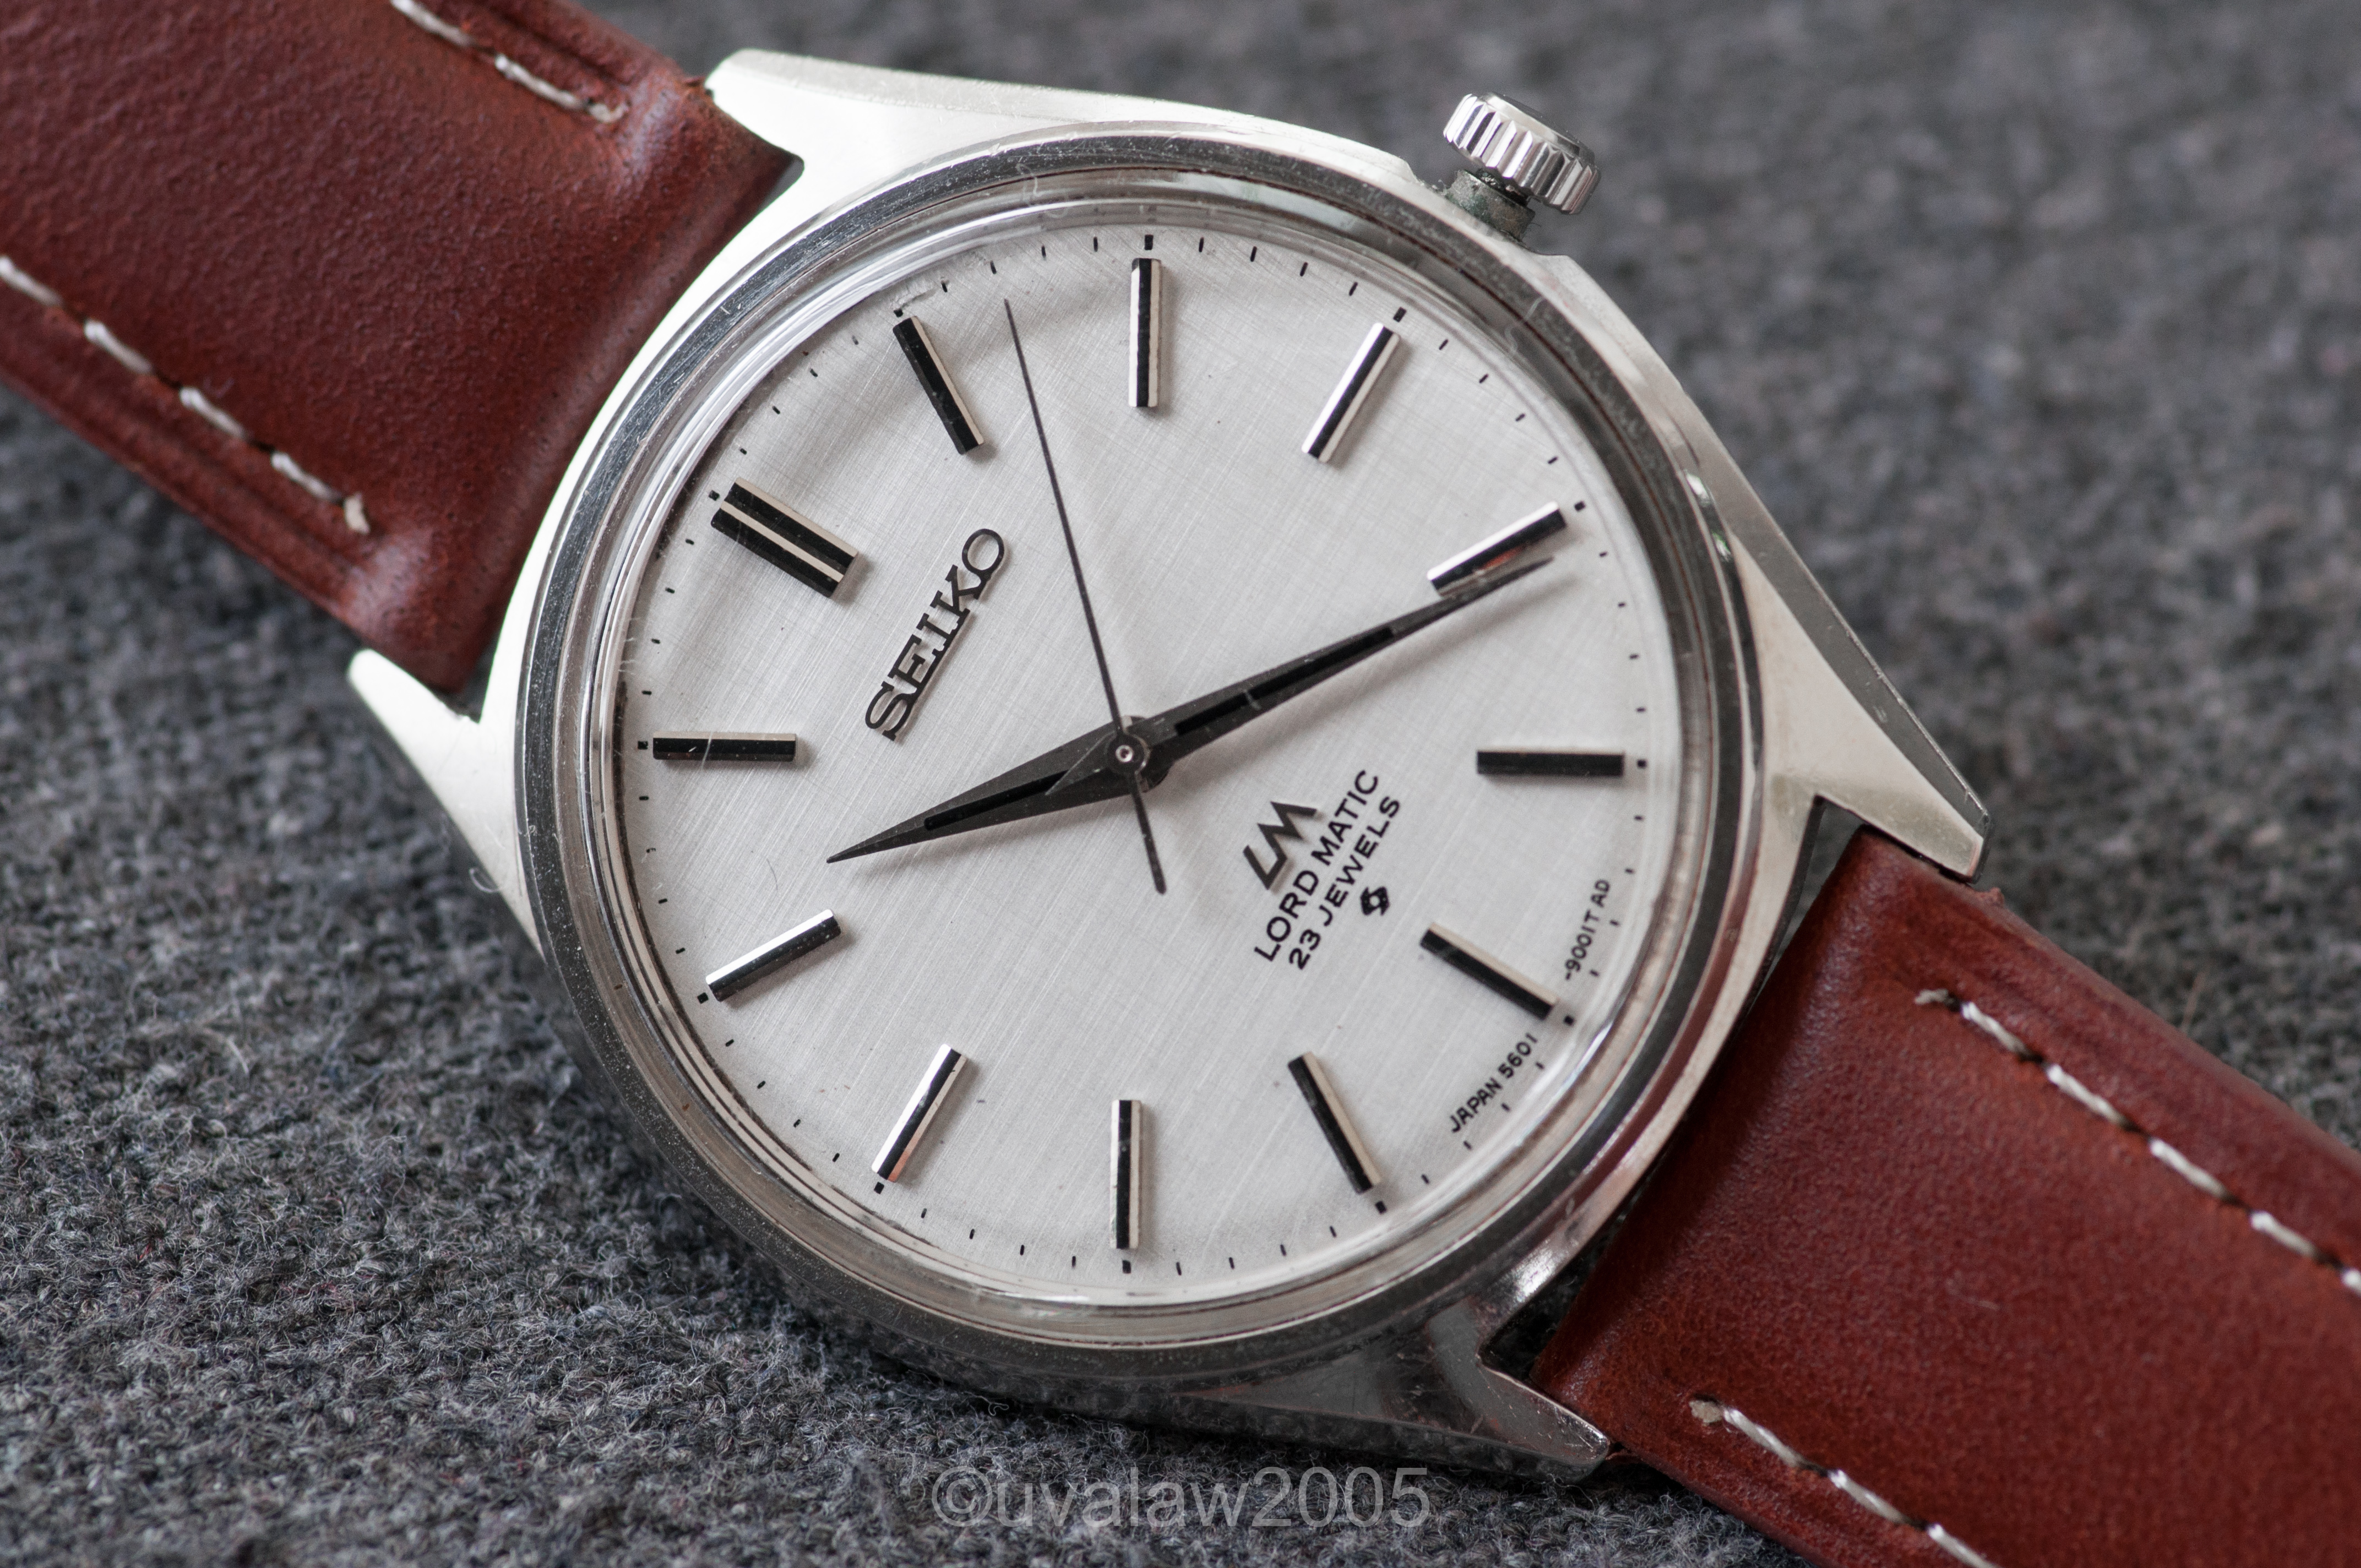 SOLD - Seiko Lord Matic, Vintage, 5601-9000, Linen Dial | Omega Forums